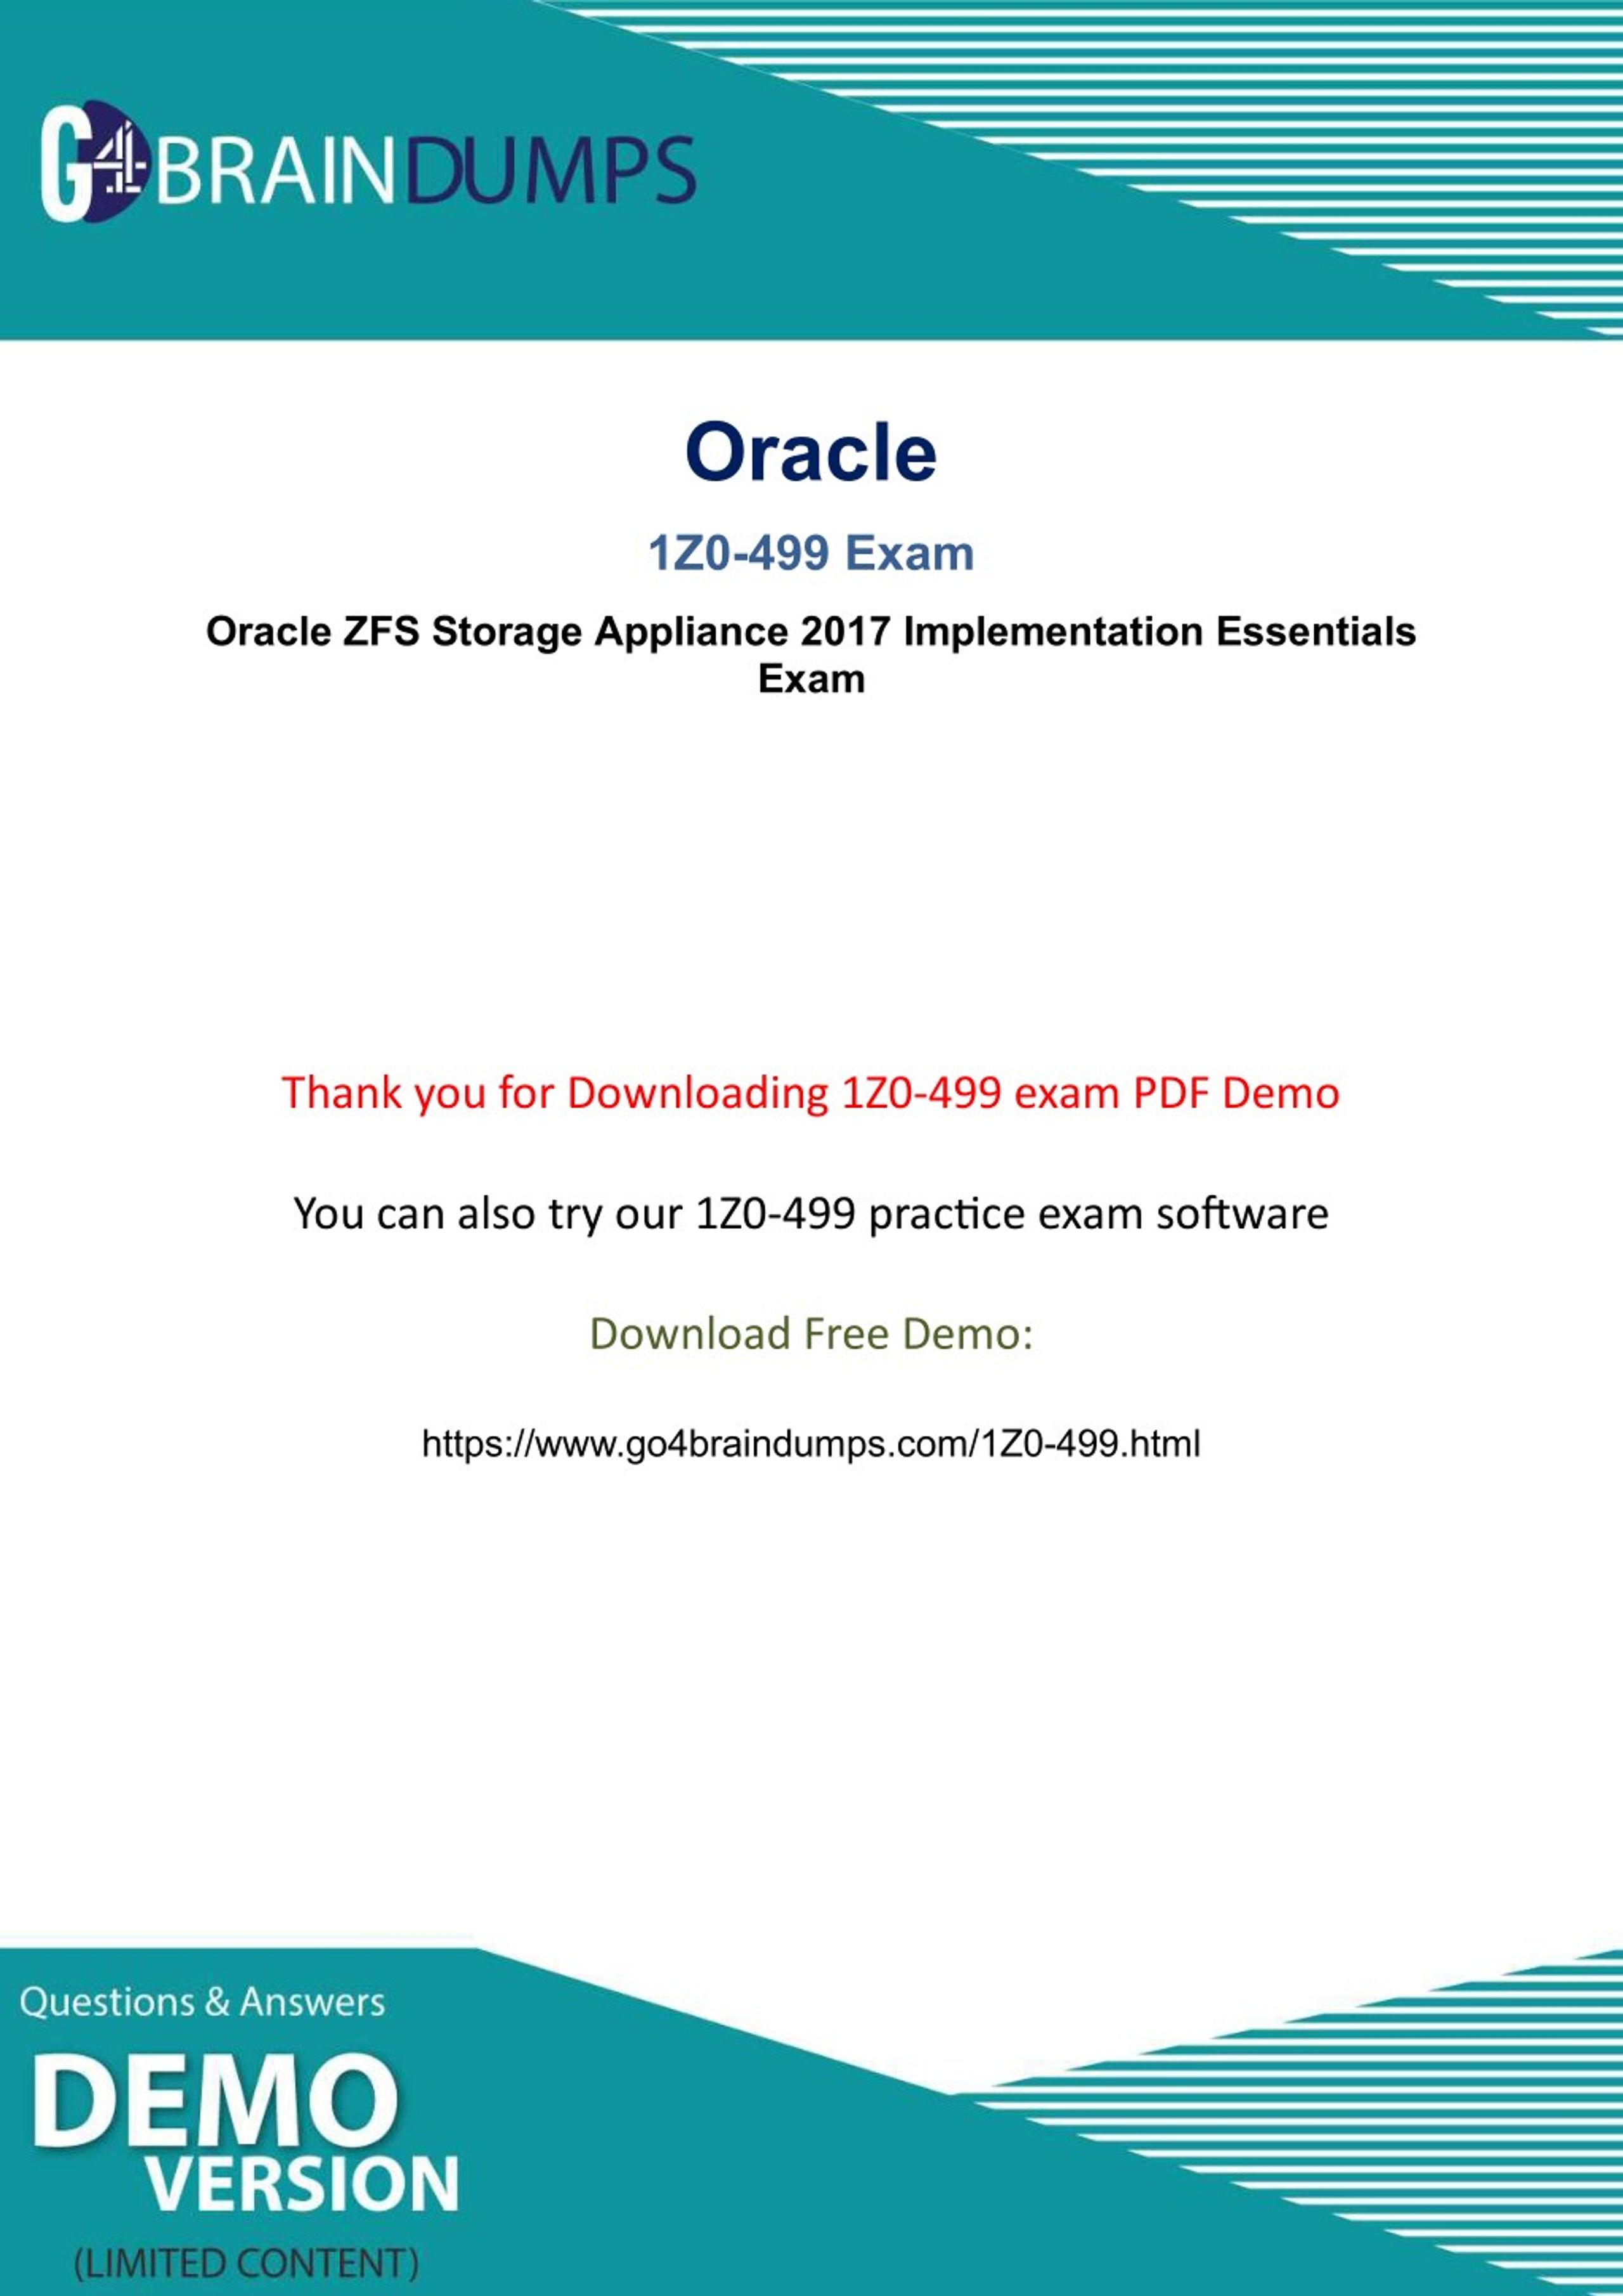 Ppt 100 Guarantee With Latest Oracle 1z0 499 Exam Braindumps Powerpoint Presentation Id